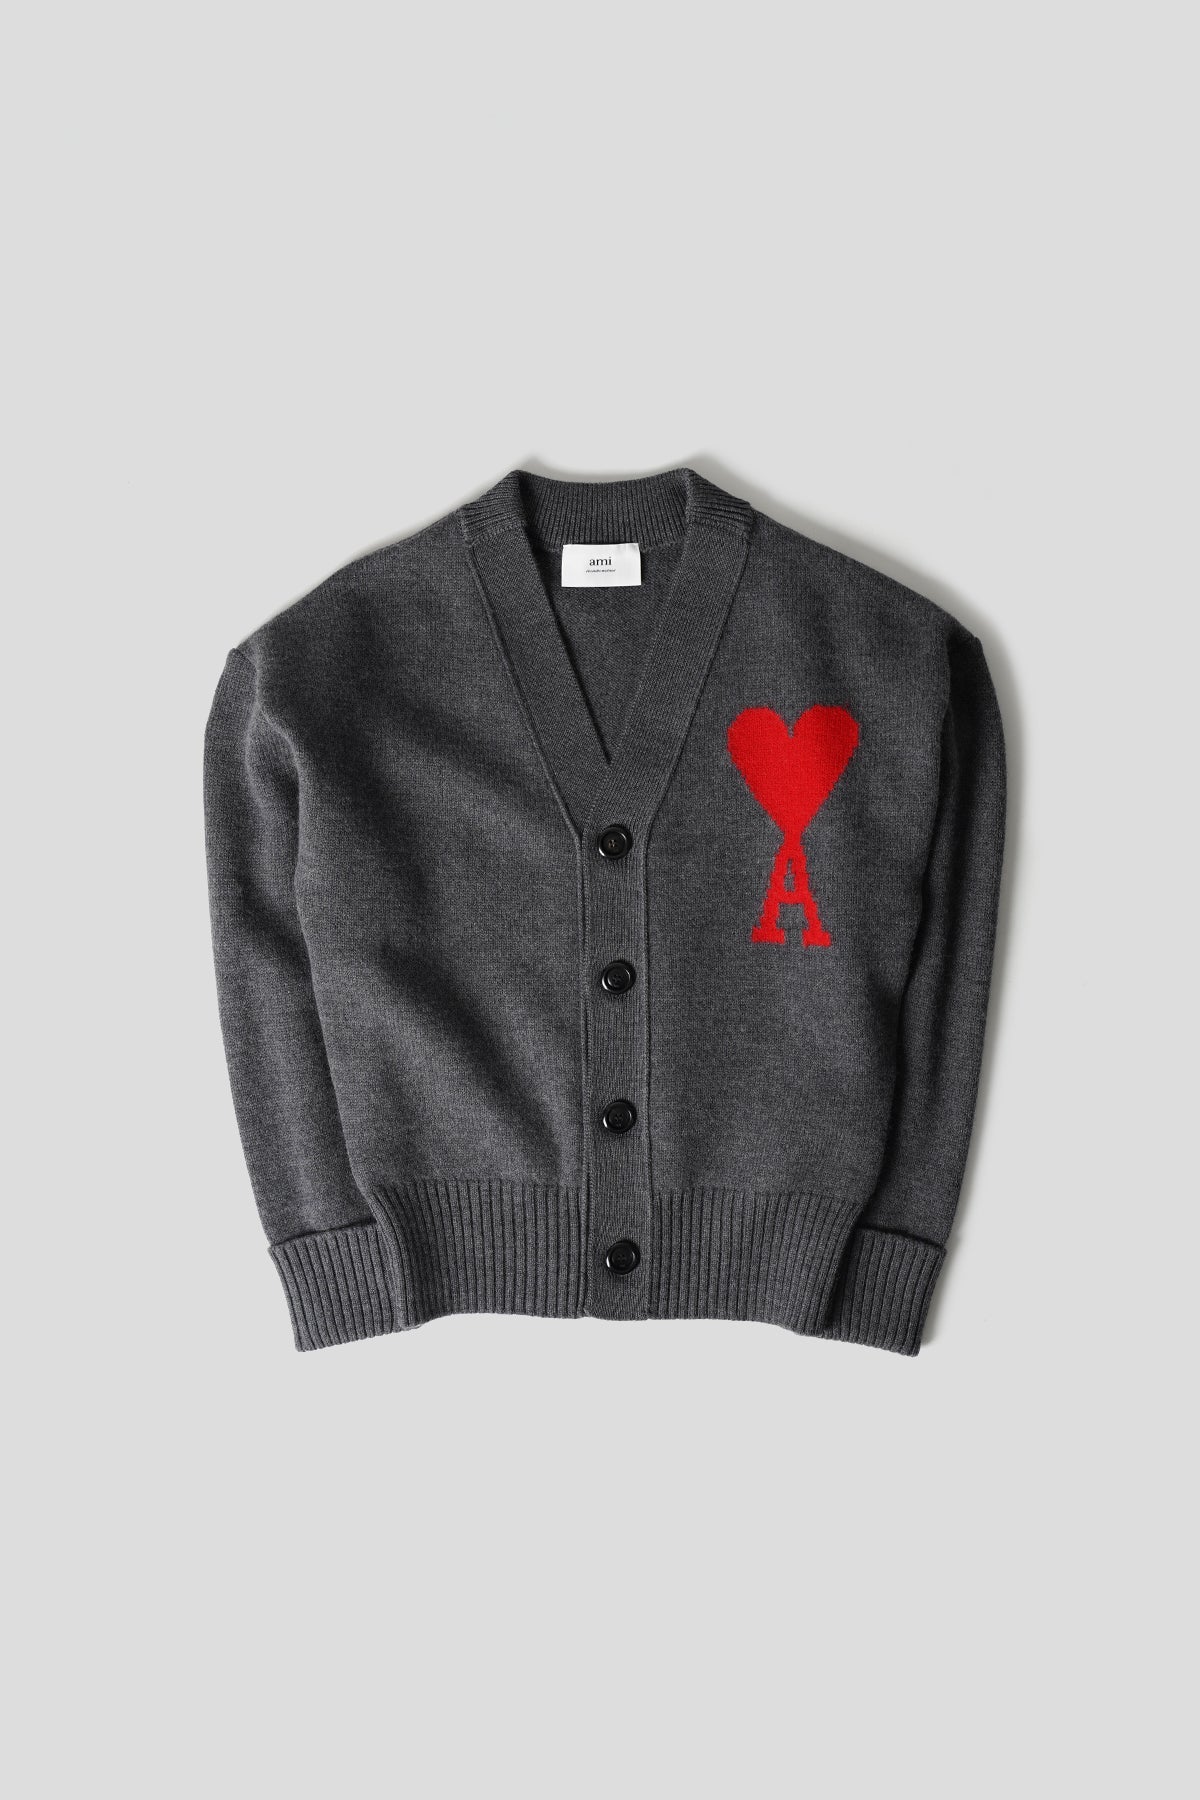 AMI PARIS - HEART FRIEND CARDIGAN GREY AND RED – LE LABO STORE